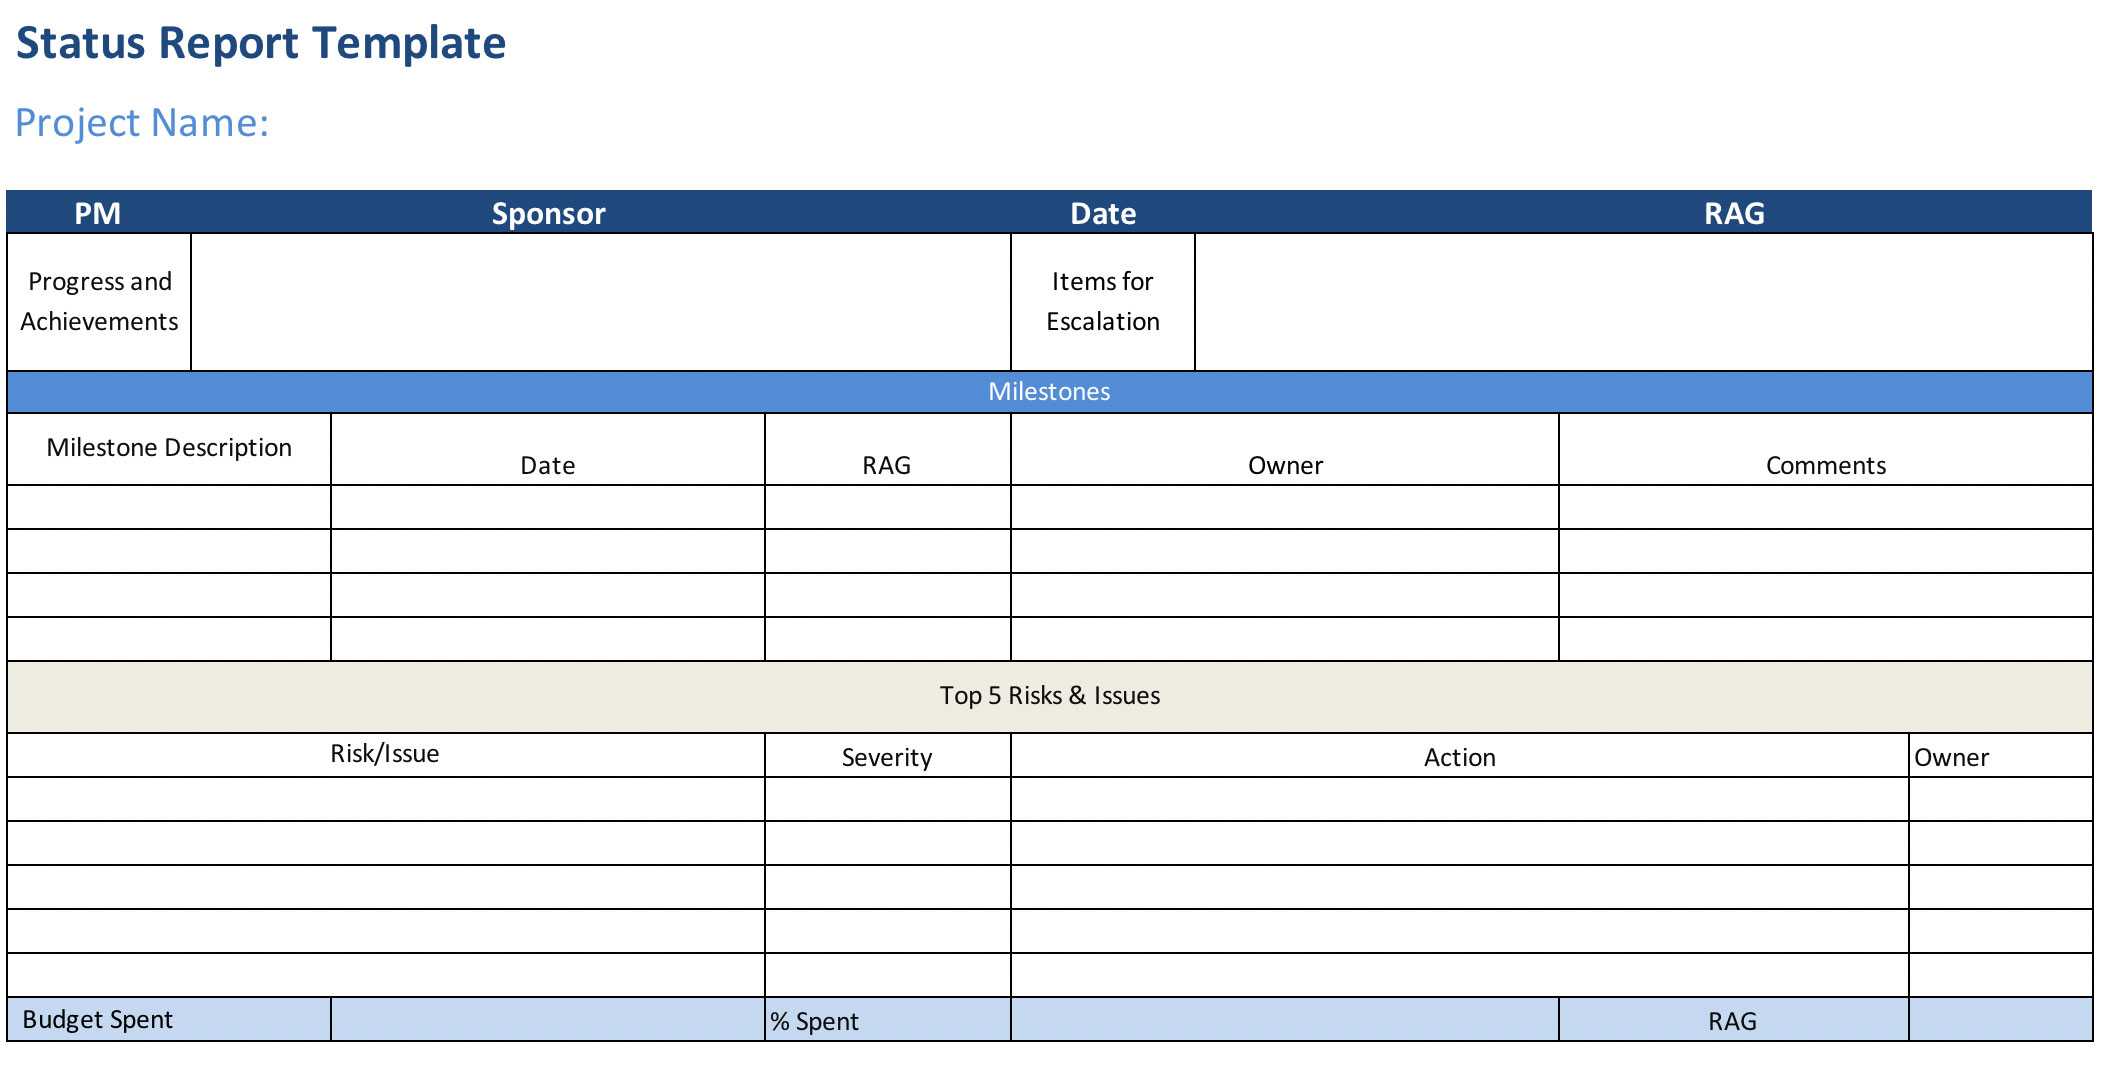 Project Status Report (Free Excel Template) – Projectmanager Throughout Daily Status Report Template Xls